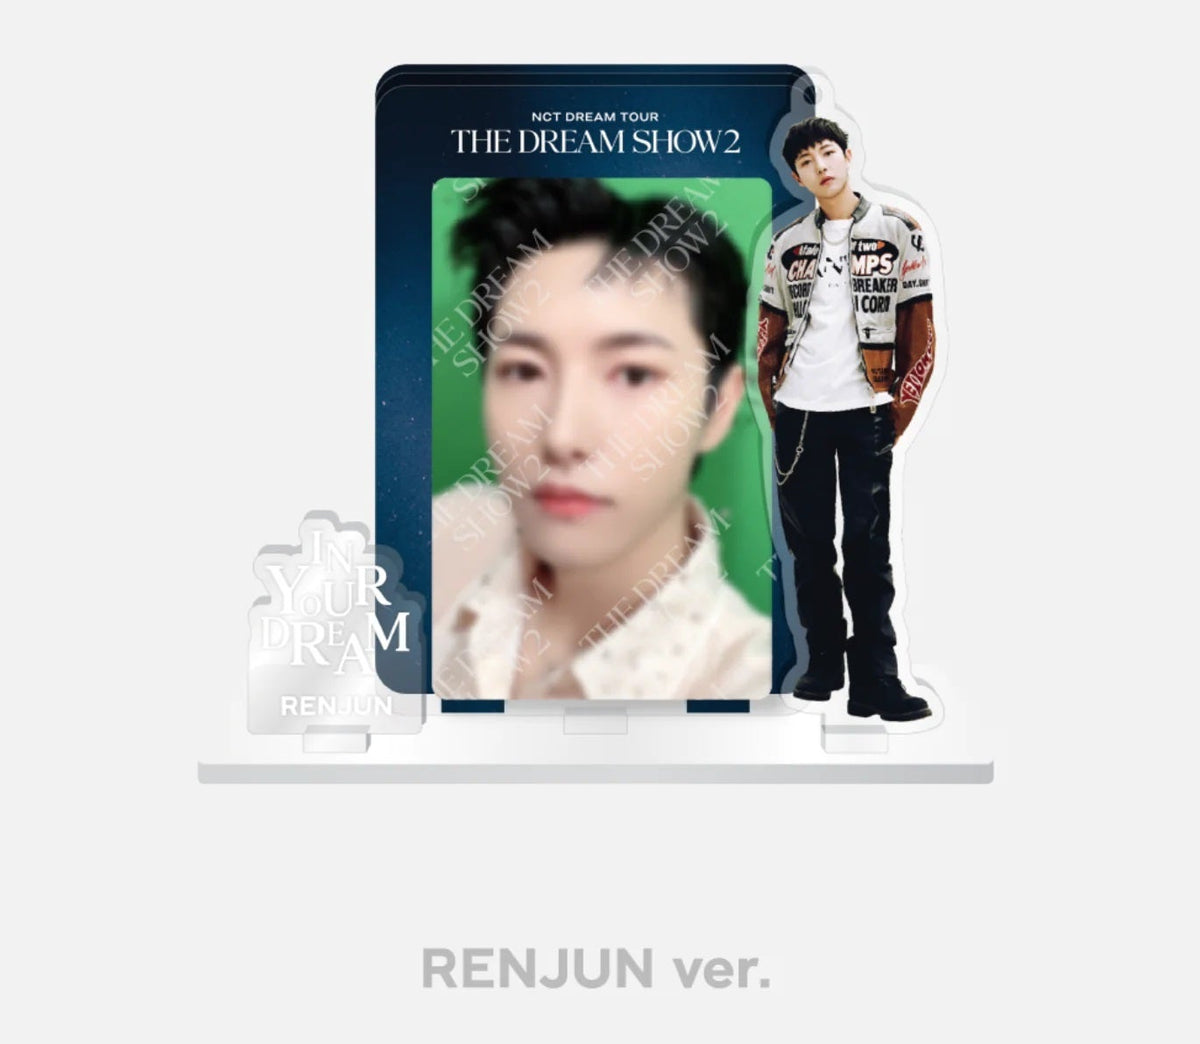 NCT DREAM Acrylic Photocard Stand Set NCT DREAM TOUR THE DREAM SHOW 2 In YOUR DREAM RENJUN Ver - main image